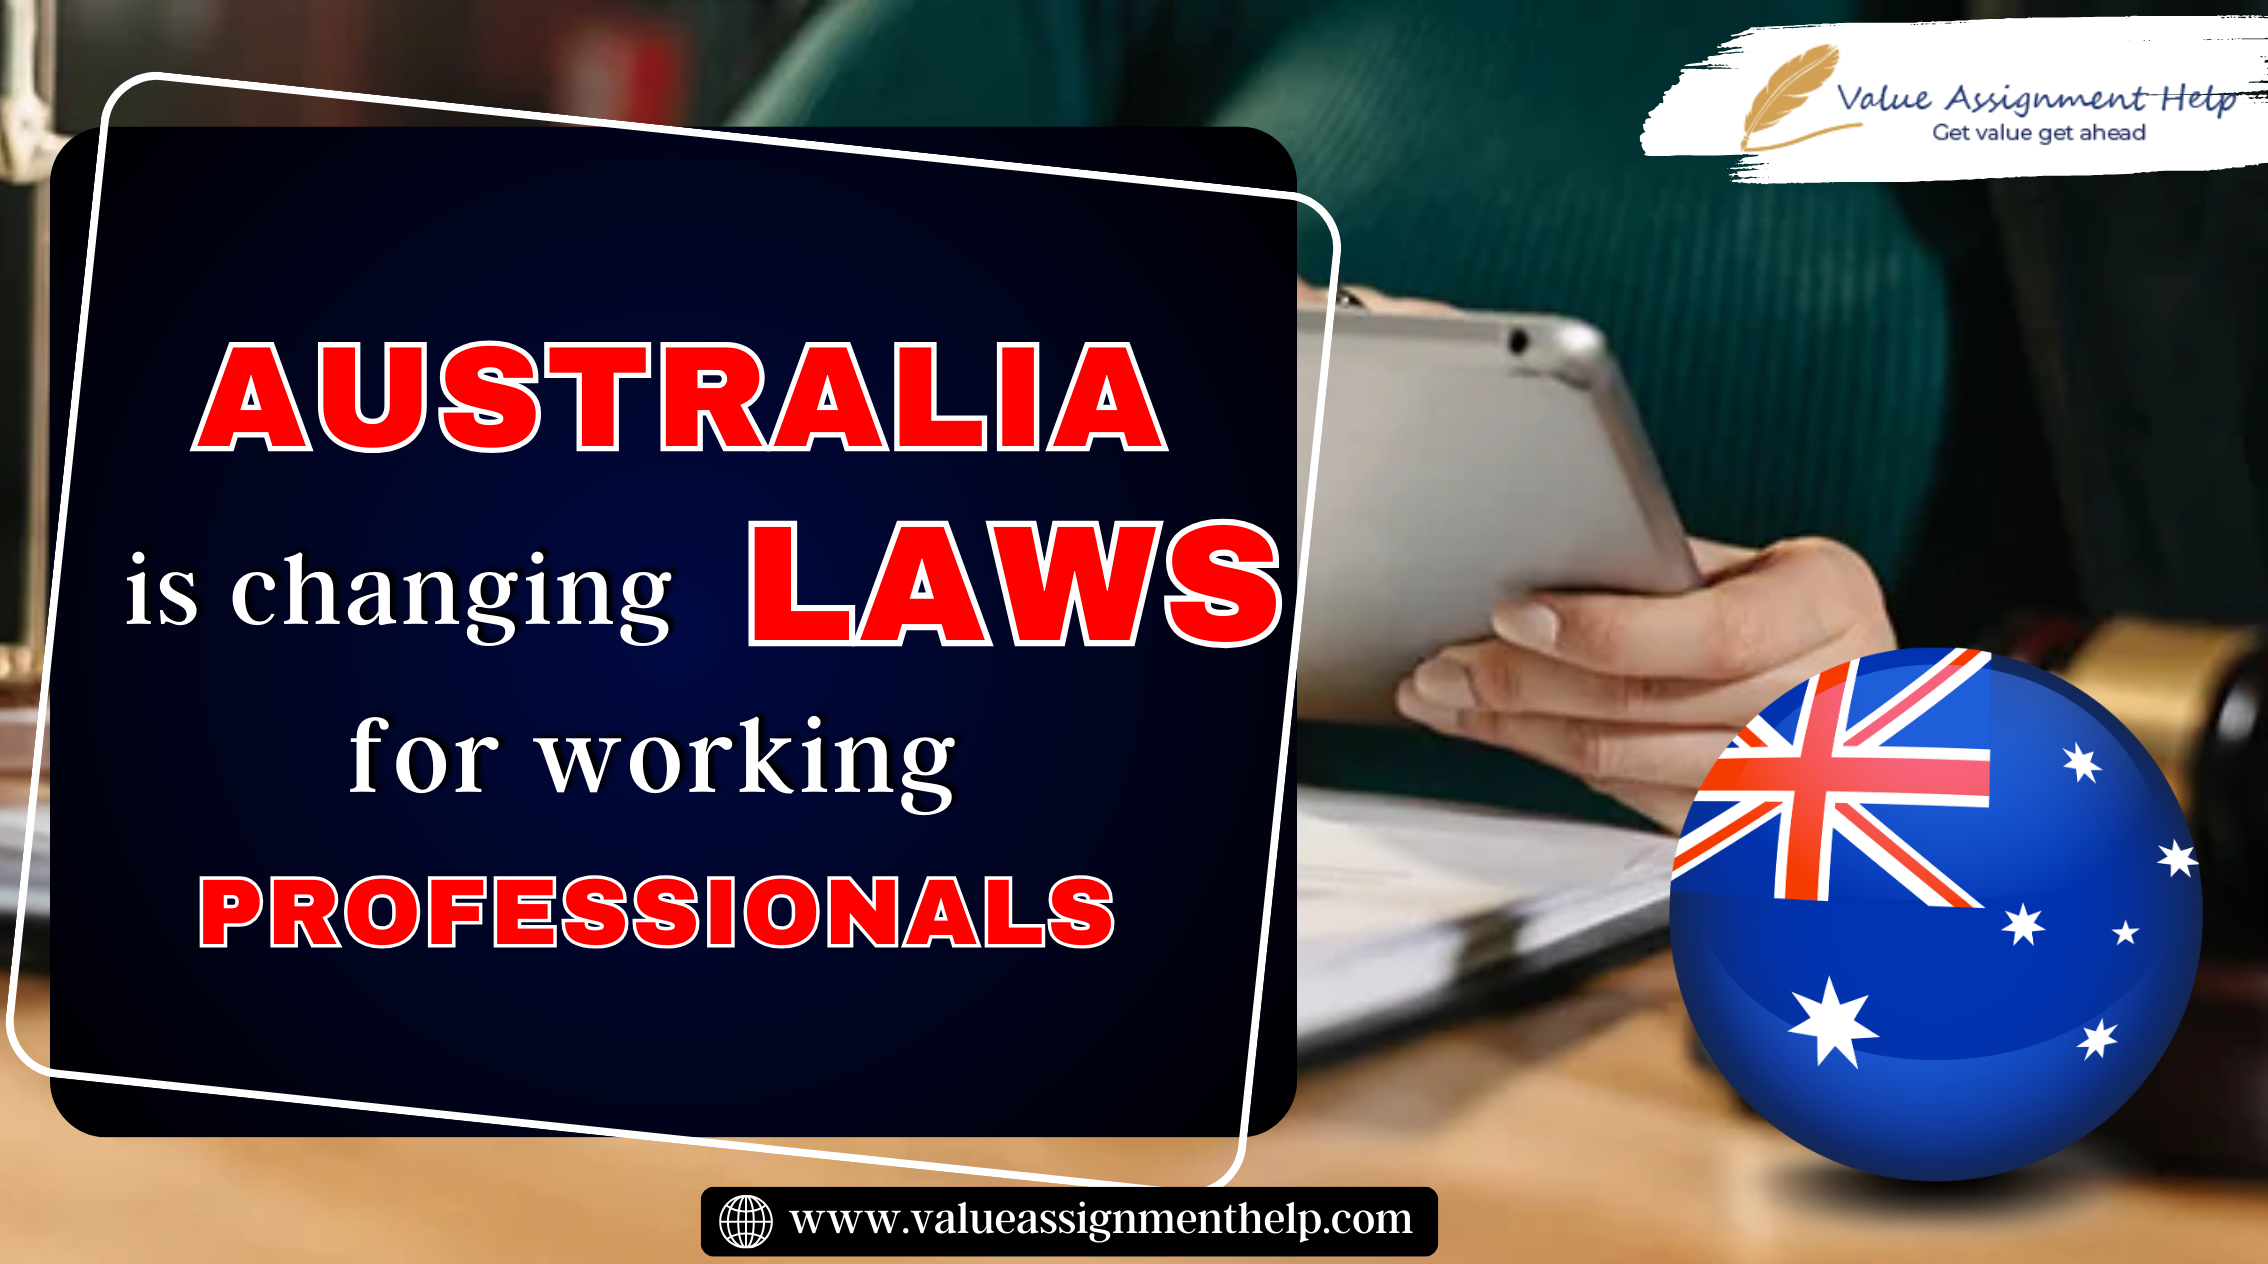  Australia is changing laws for working professionals